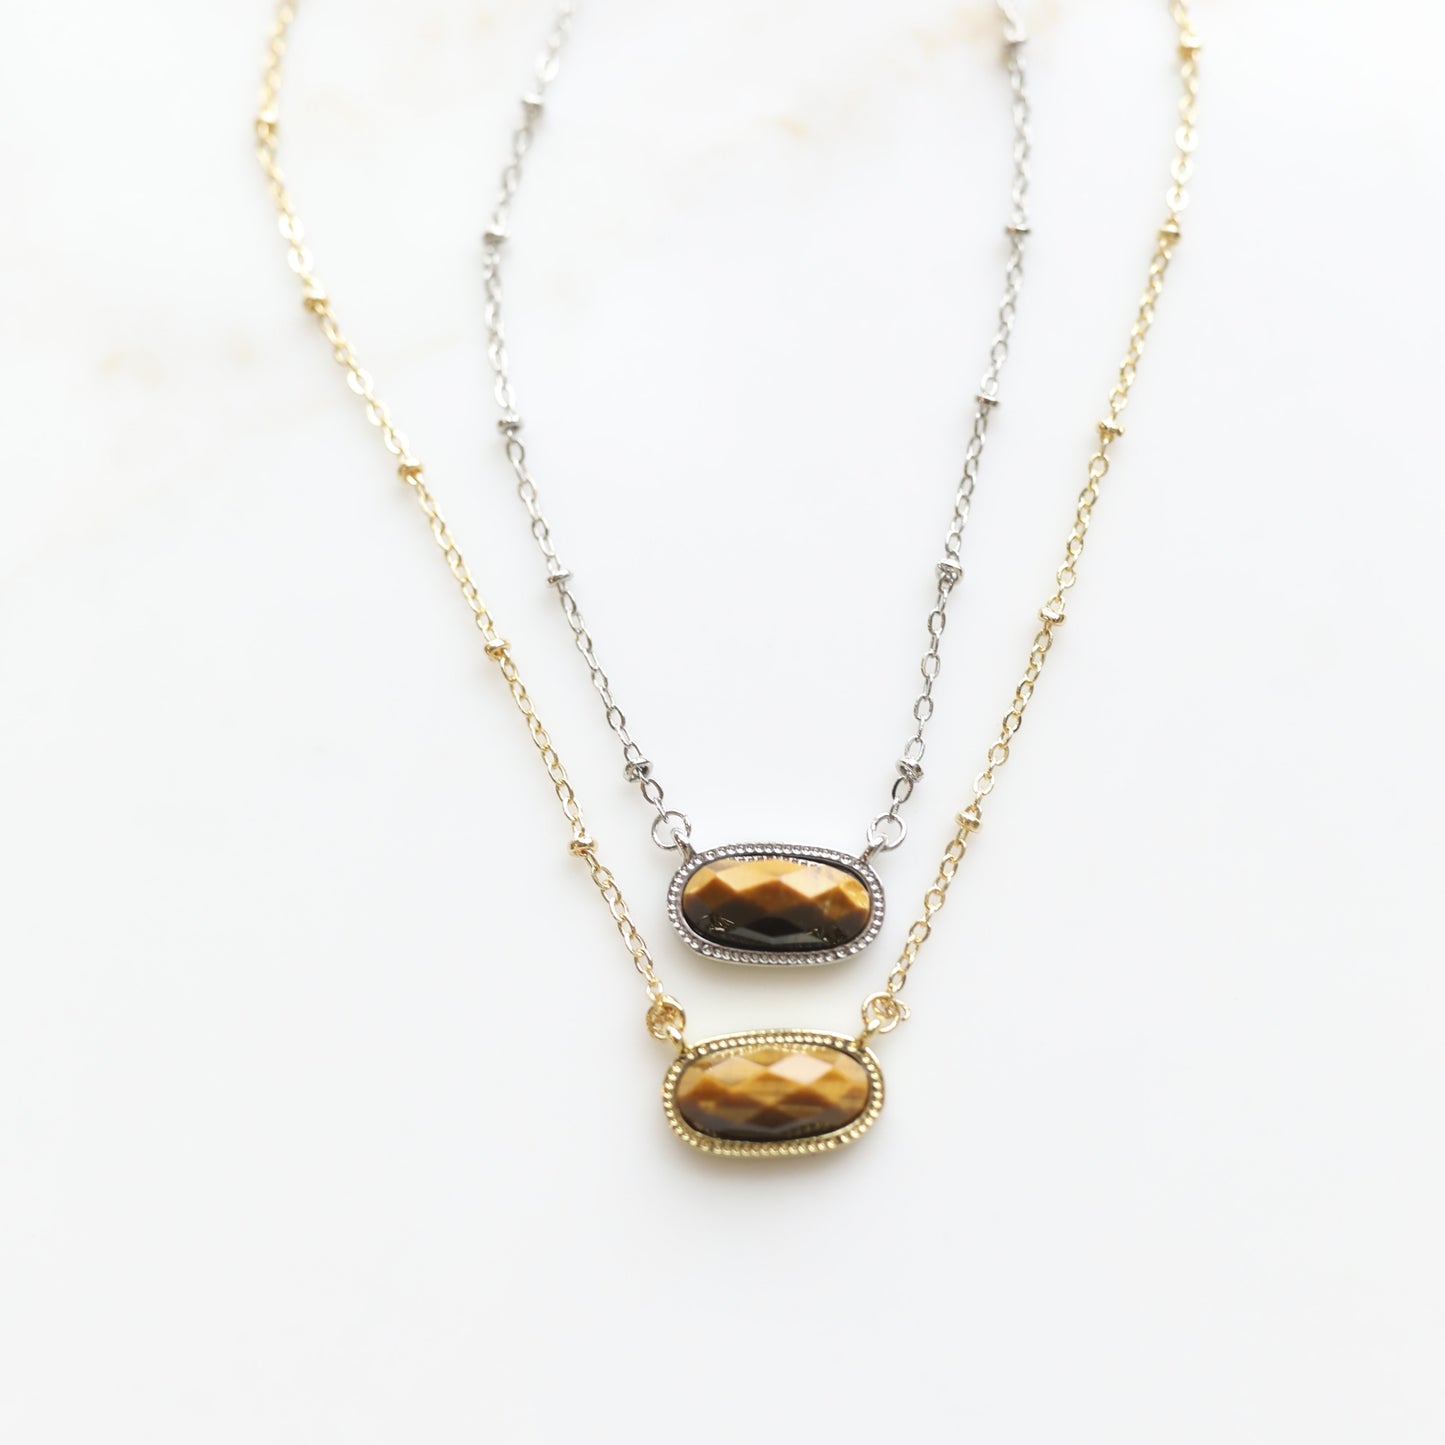 Meaningful Gemstone Necklace in Tiger Eye Brown available with a Gold or Silver chain